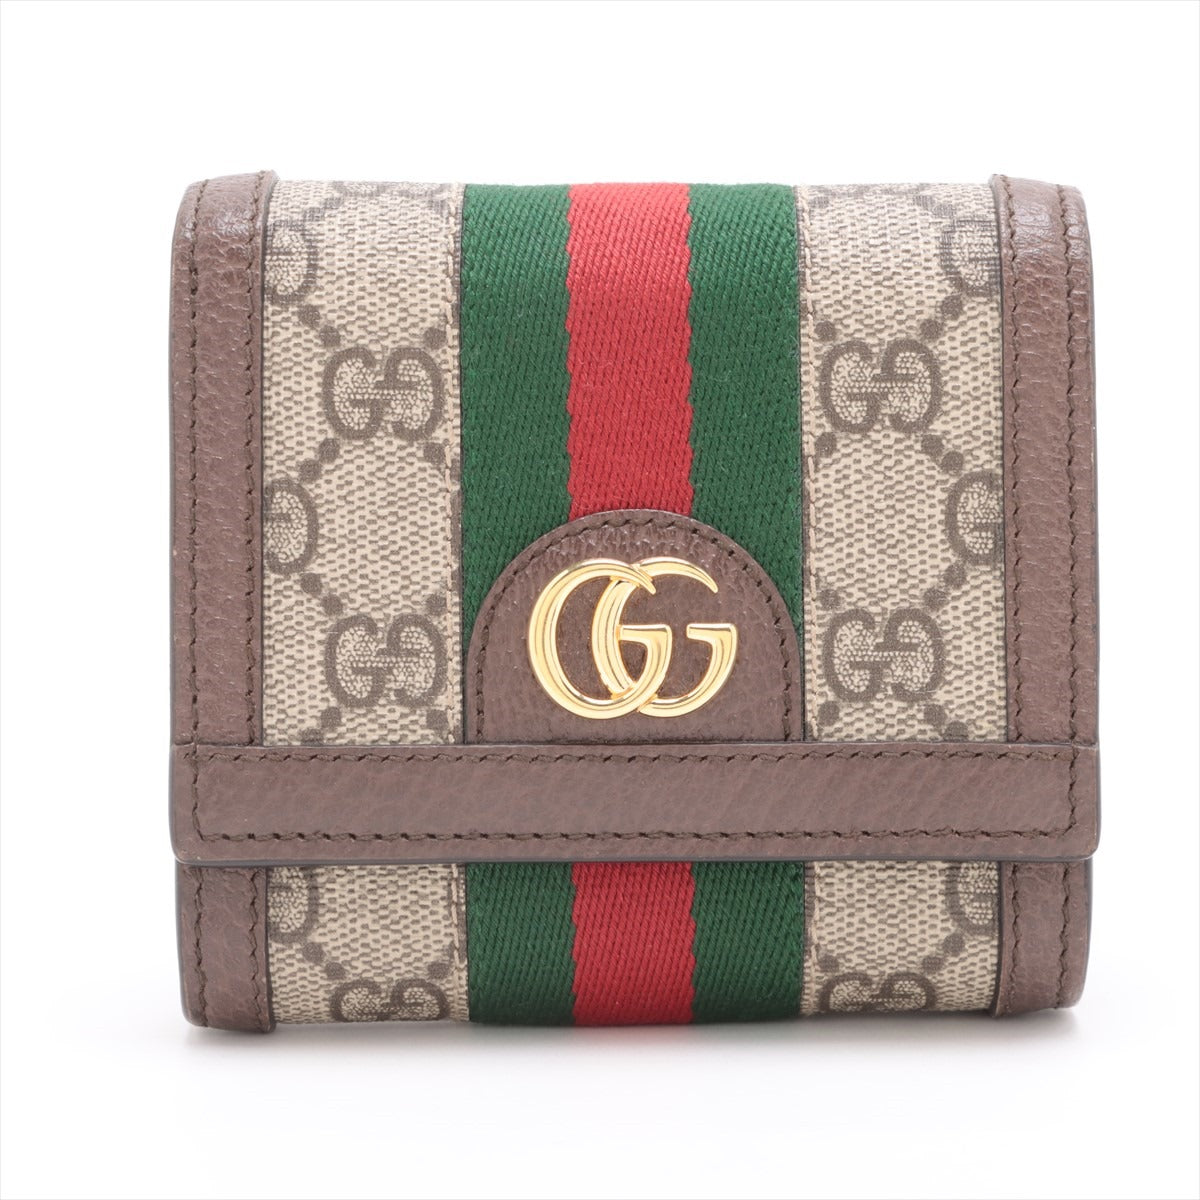 Gucci GG Supreme 598662 PVC & leather Compact Wallet Beige